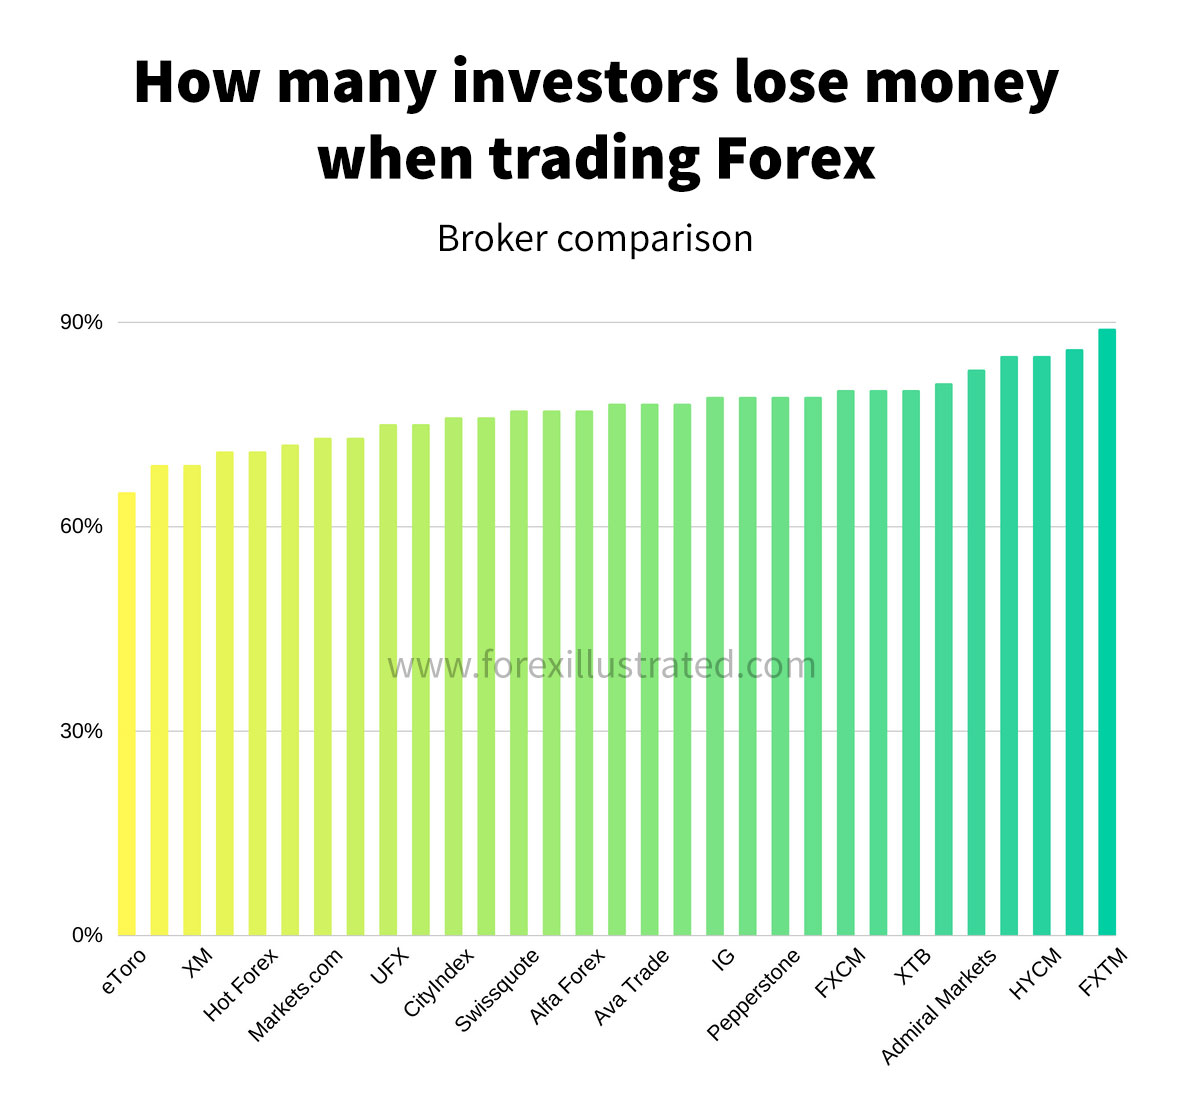 how many forex and stock traders lose money when trading - different broker comparison 